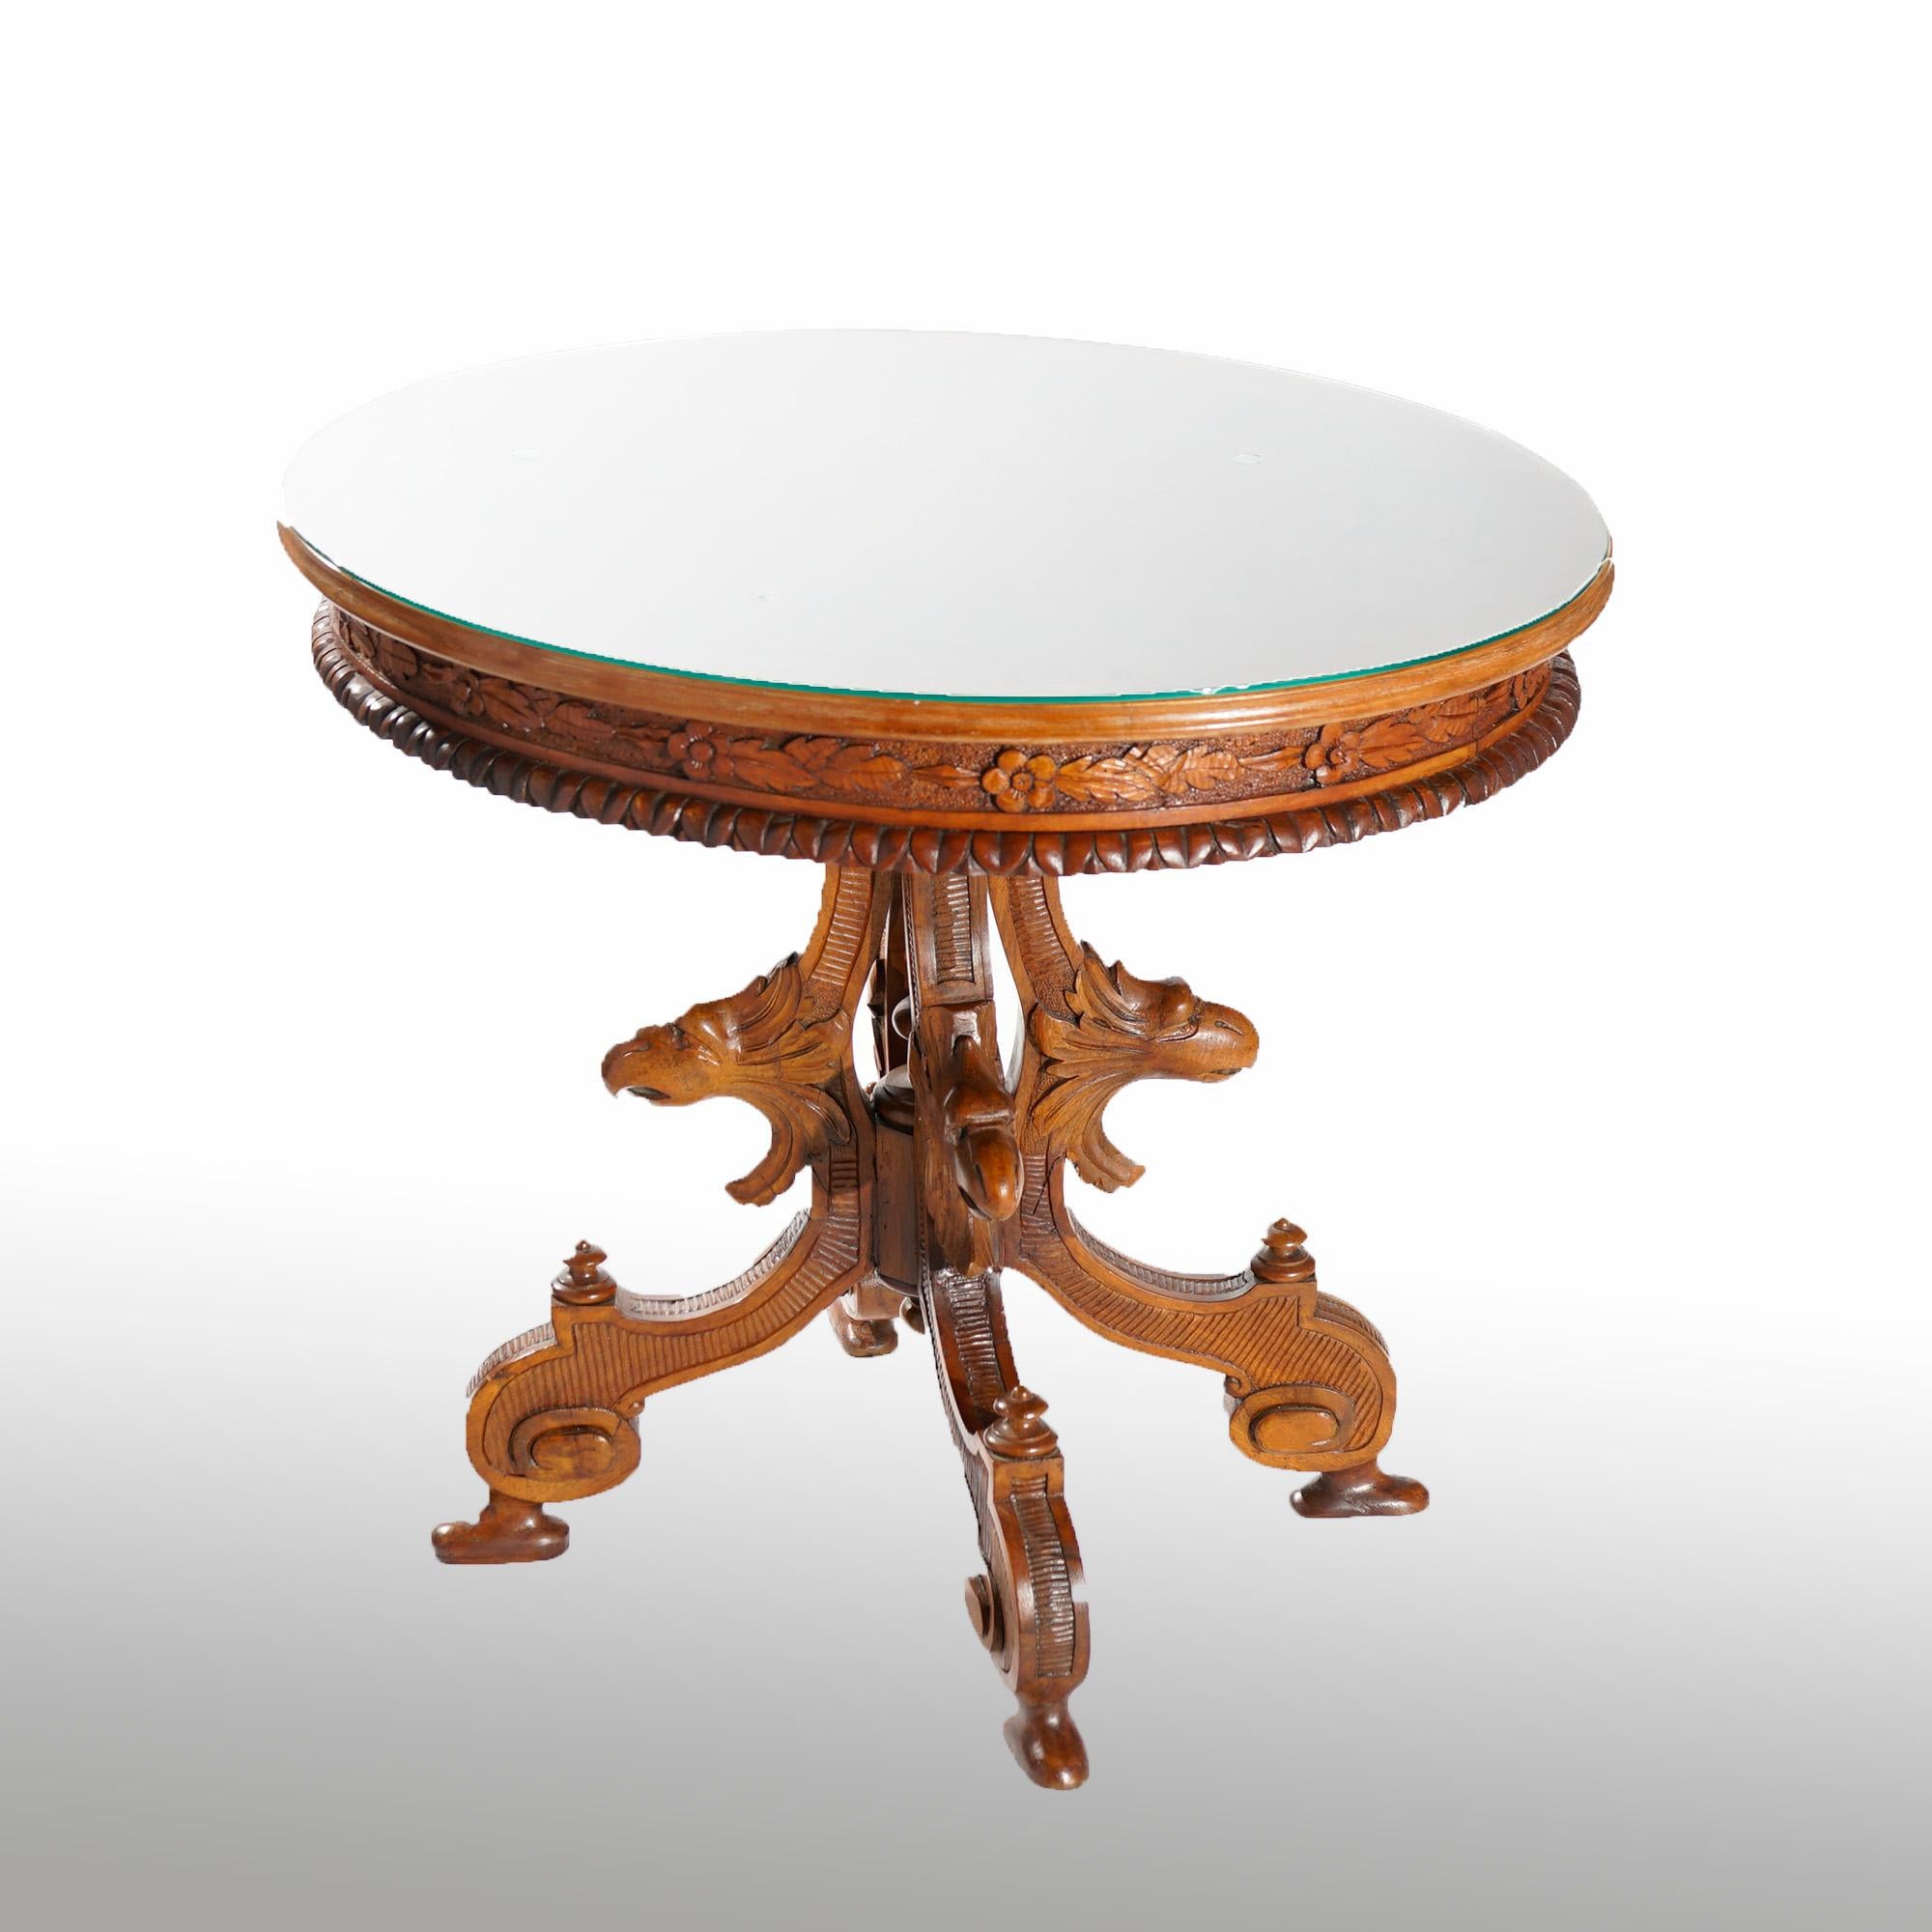 An antique Classical center table offers marquetry inlaid top having central cherub playing a flute in countryside setting with floral and foliate surround over carved skirt, raised on cabriole legs with figural carved eagle or phoenix heads